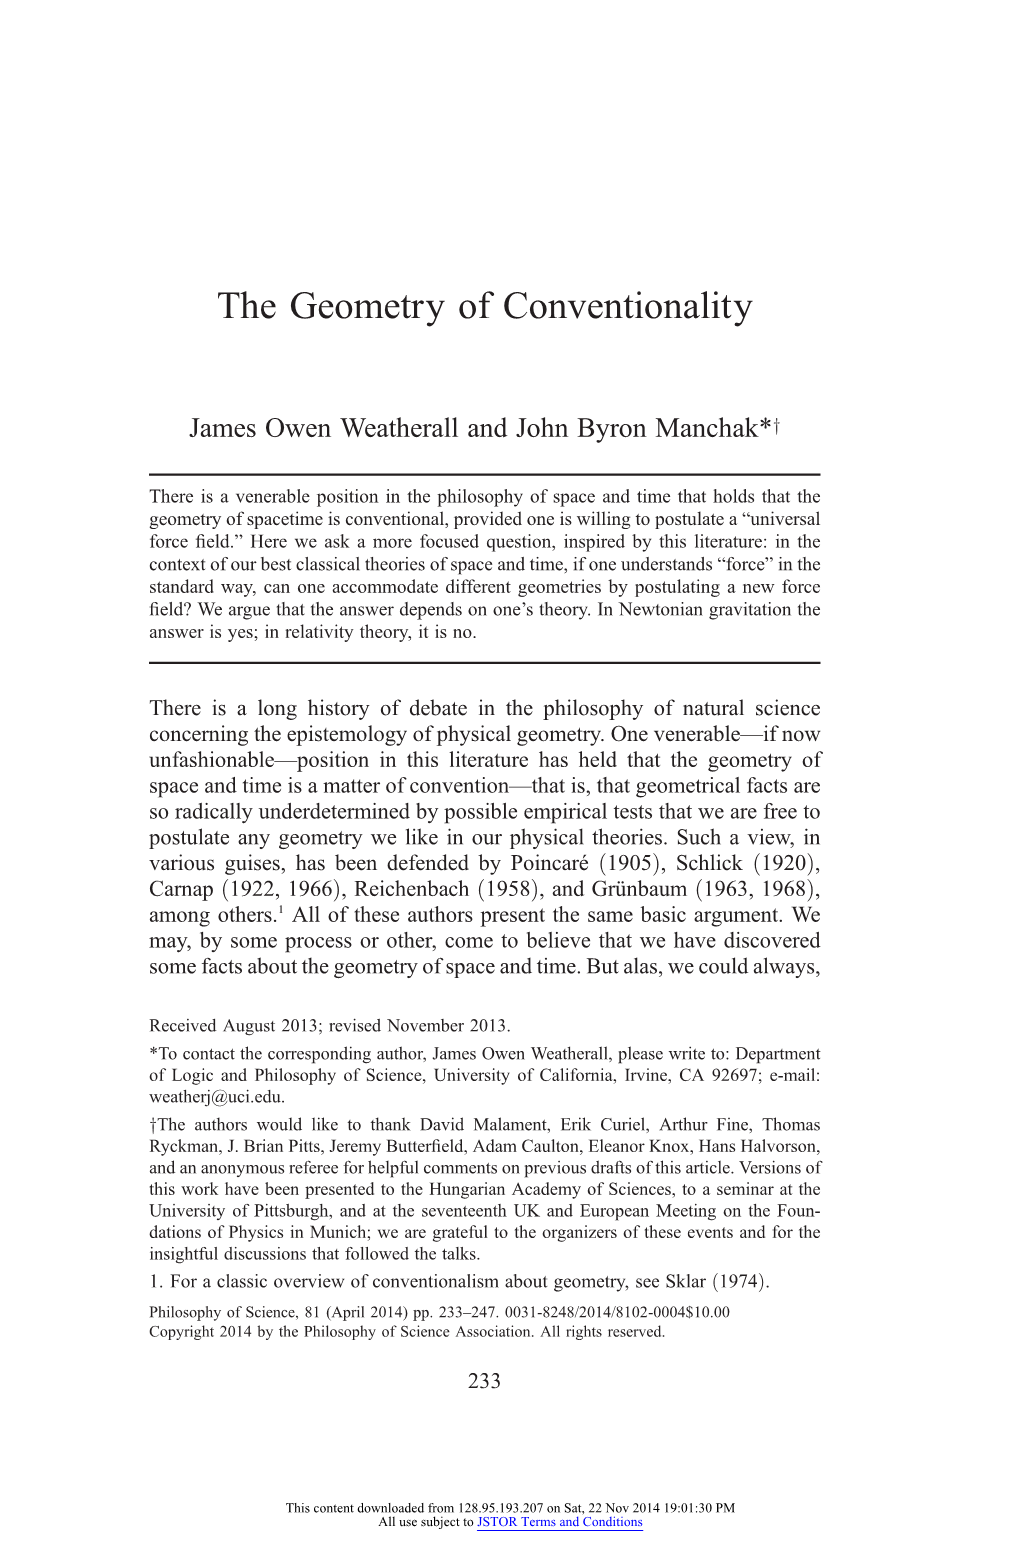 The Geometry of Conventionality